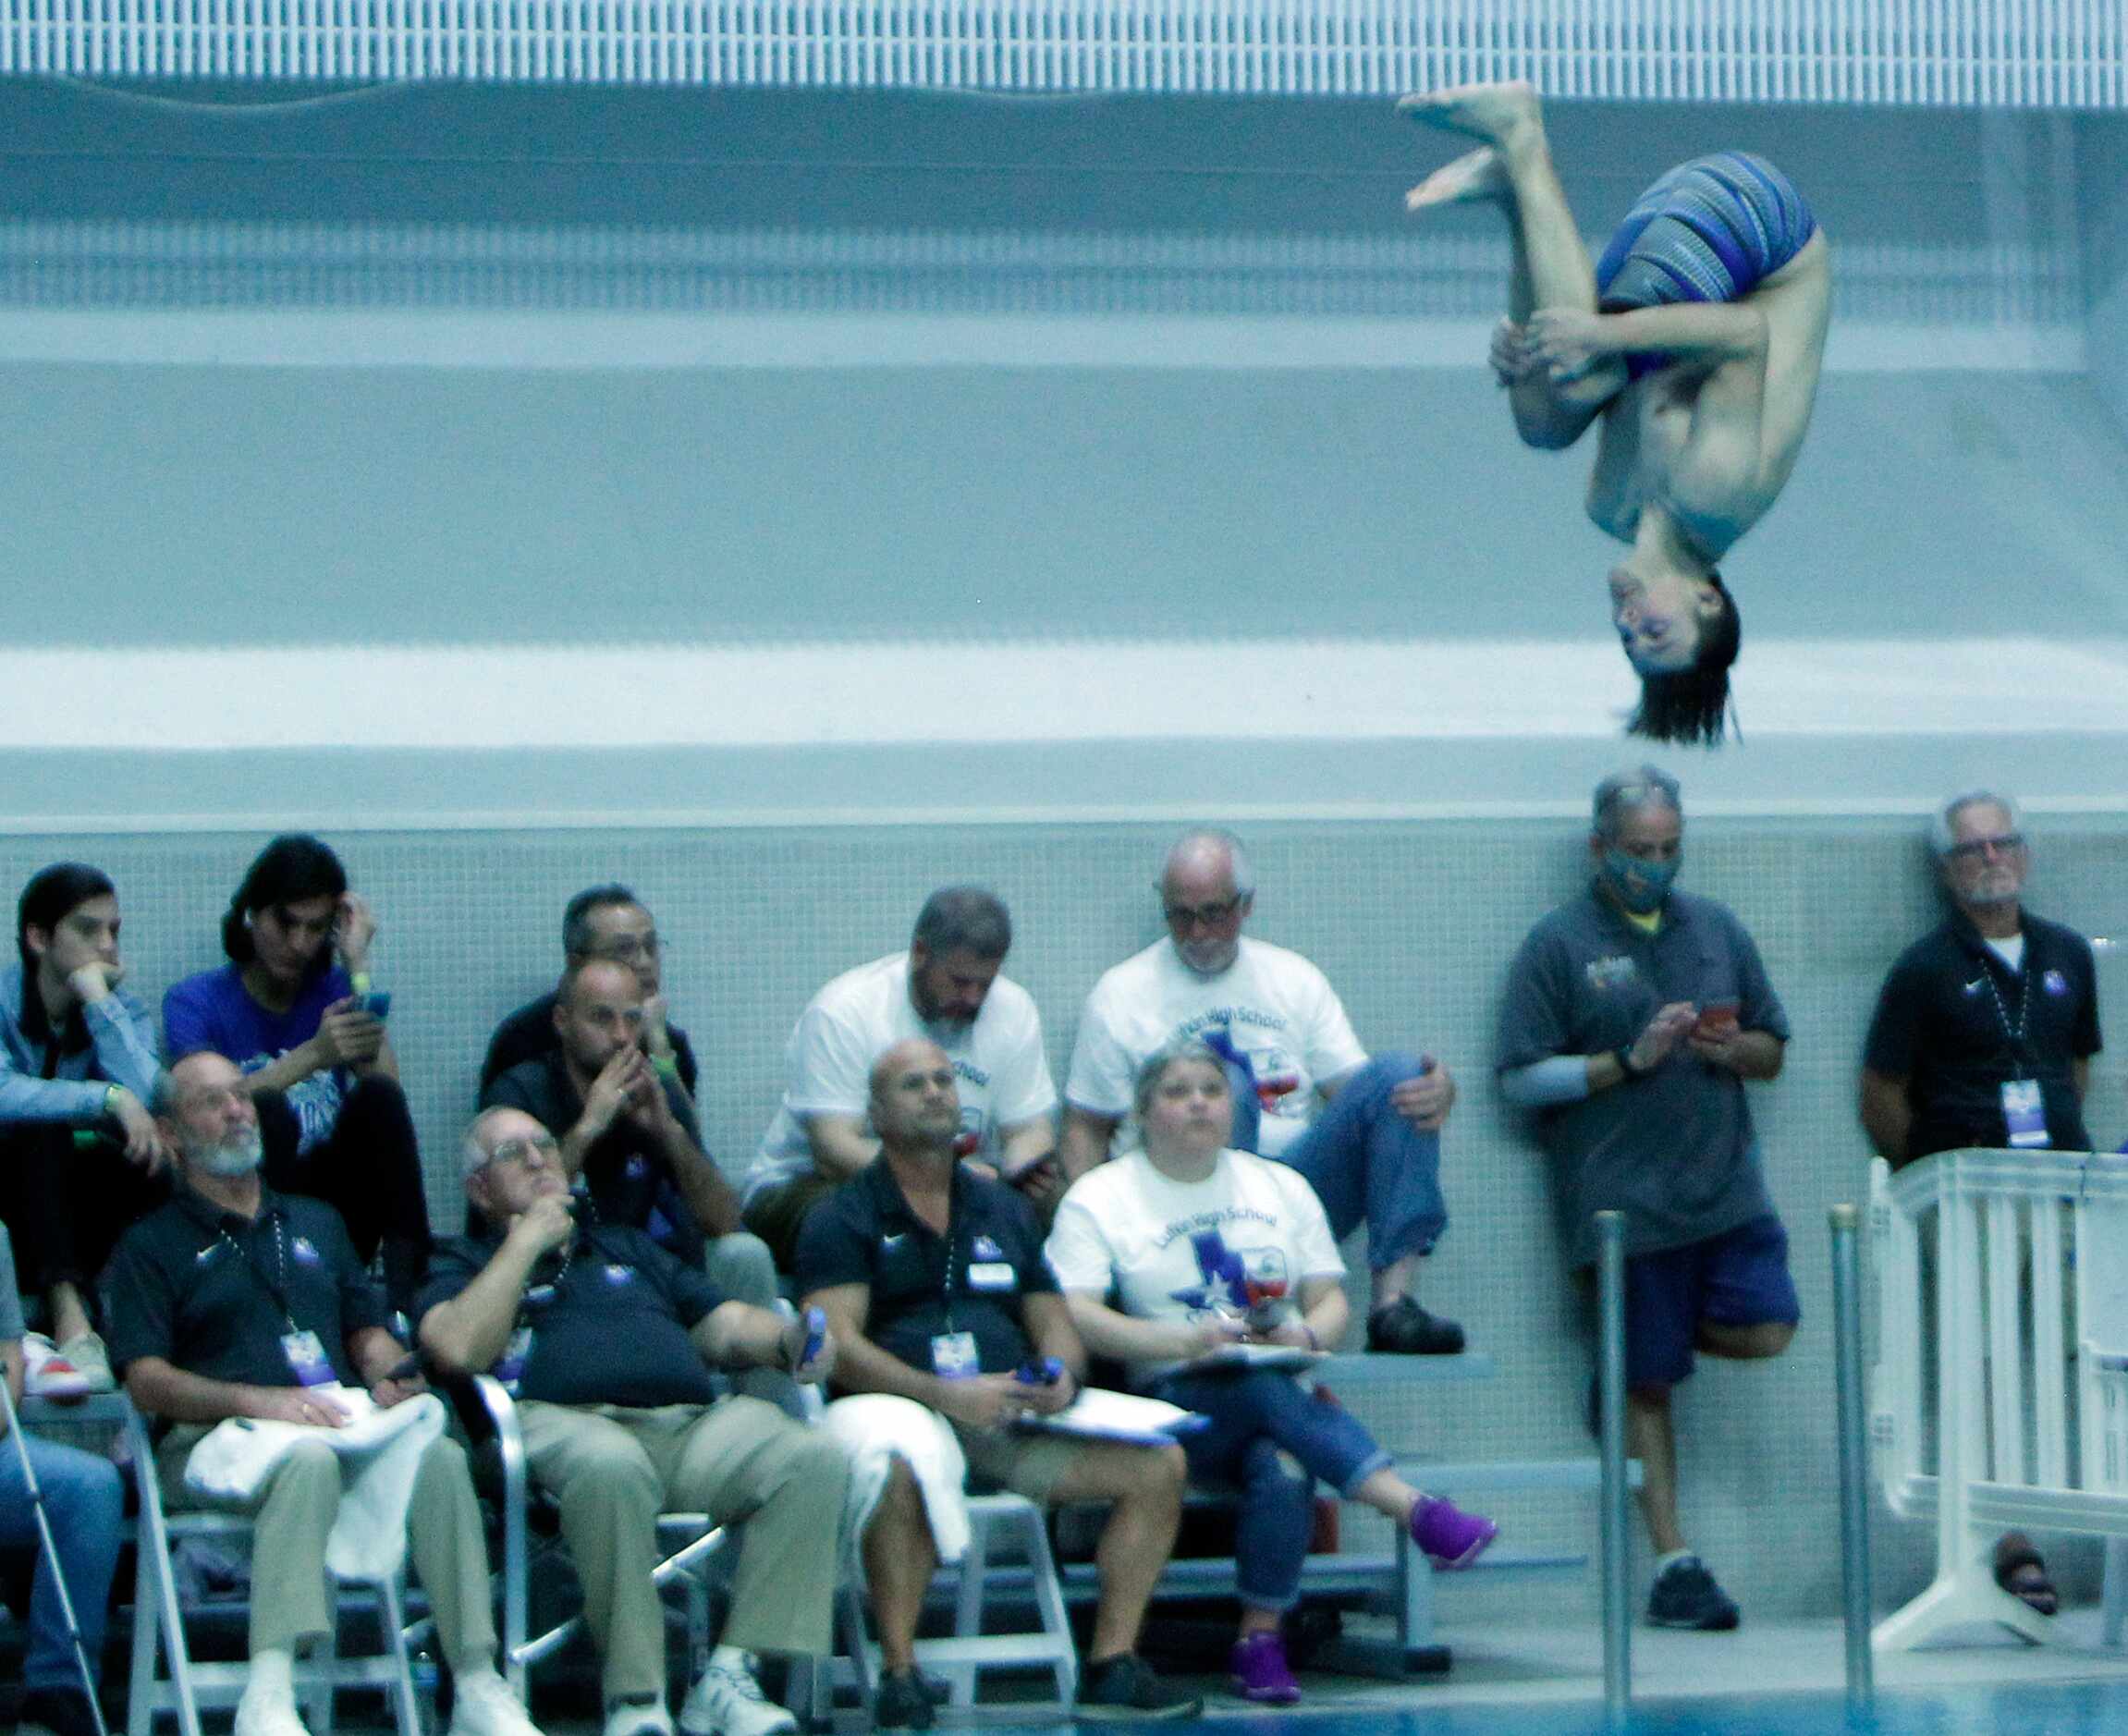 Forney diver Bryce Benson competes before judges in the Boys 5A Diving competition. The...